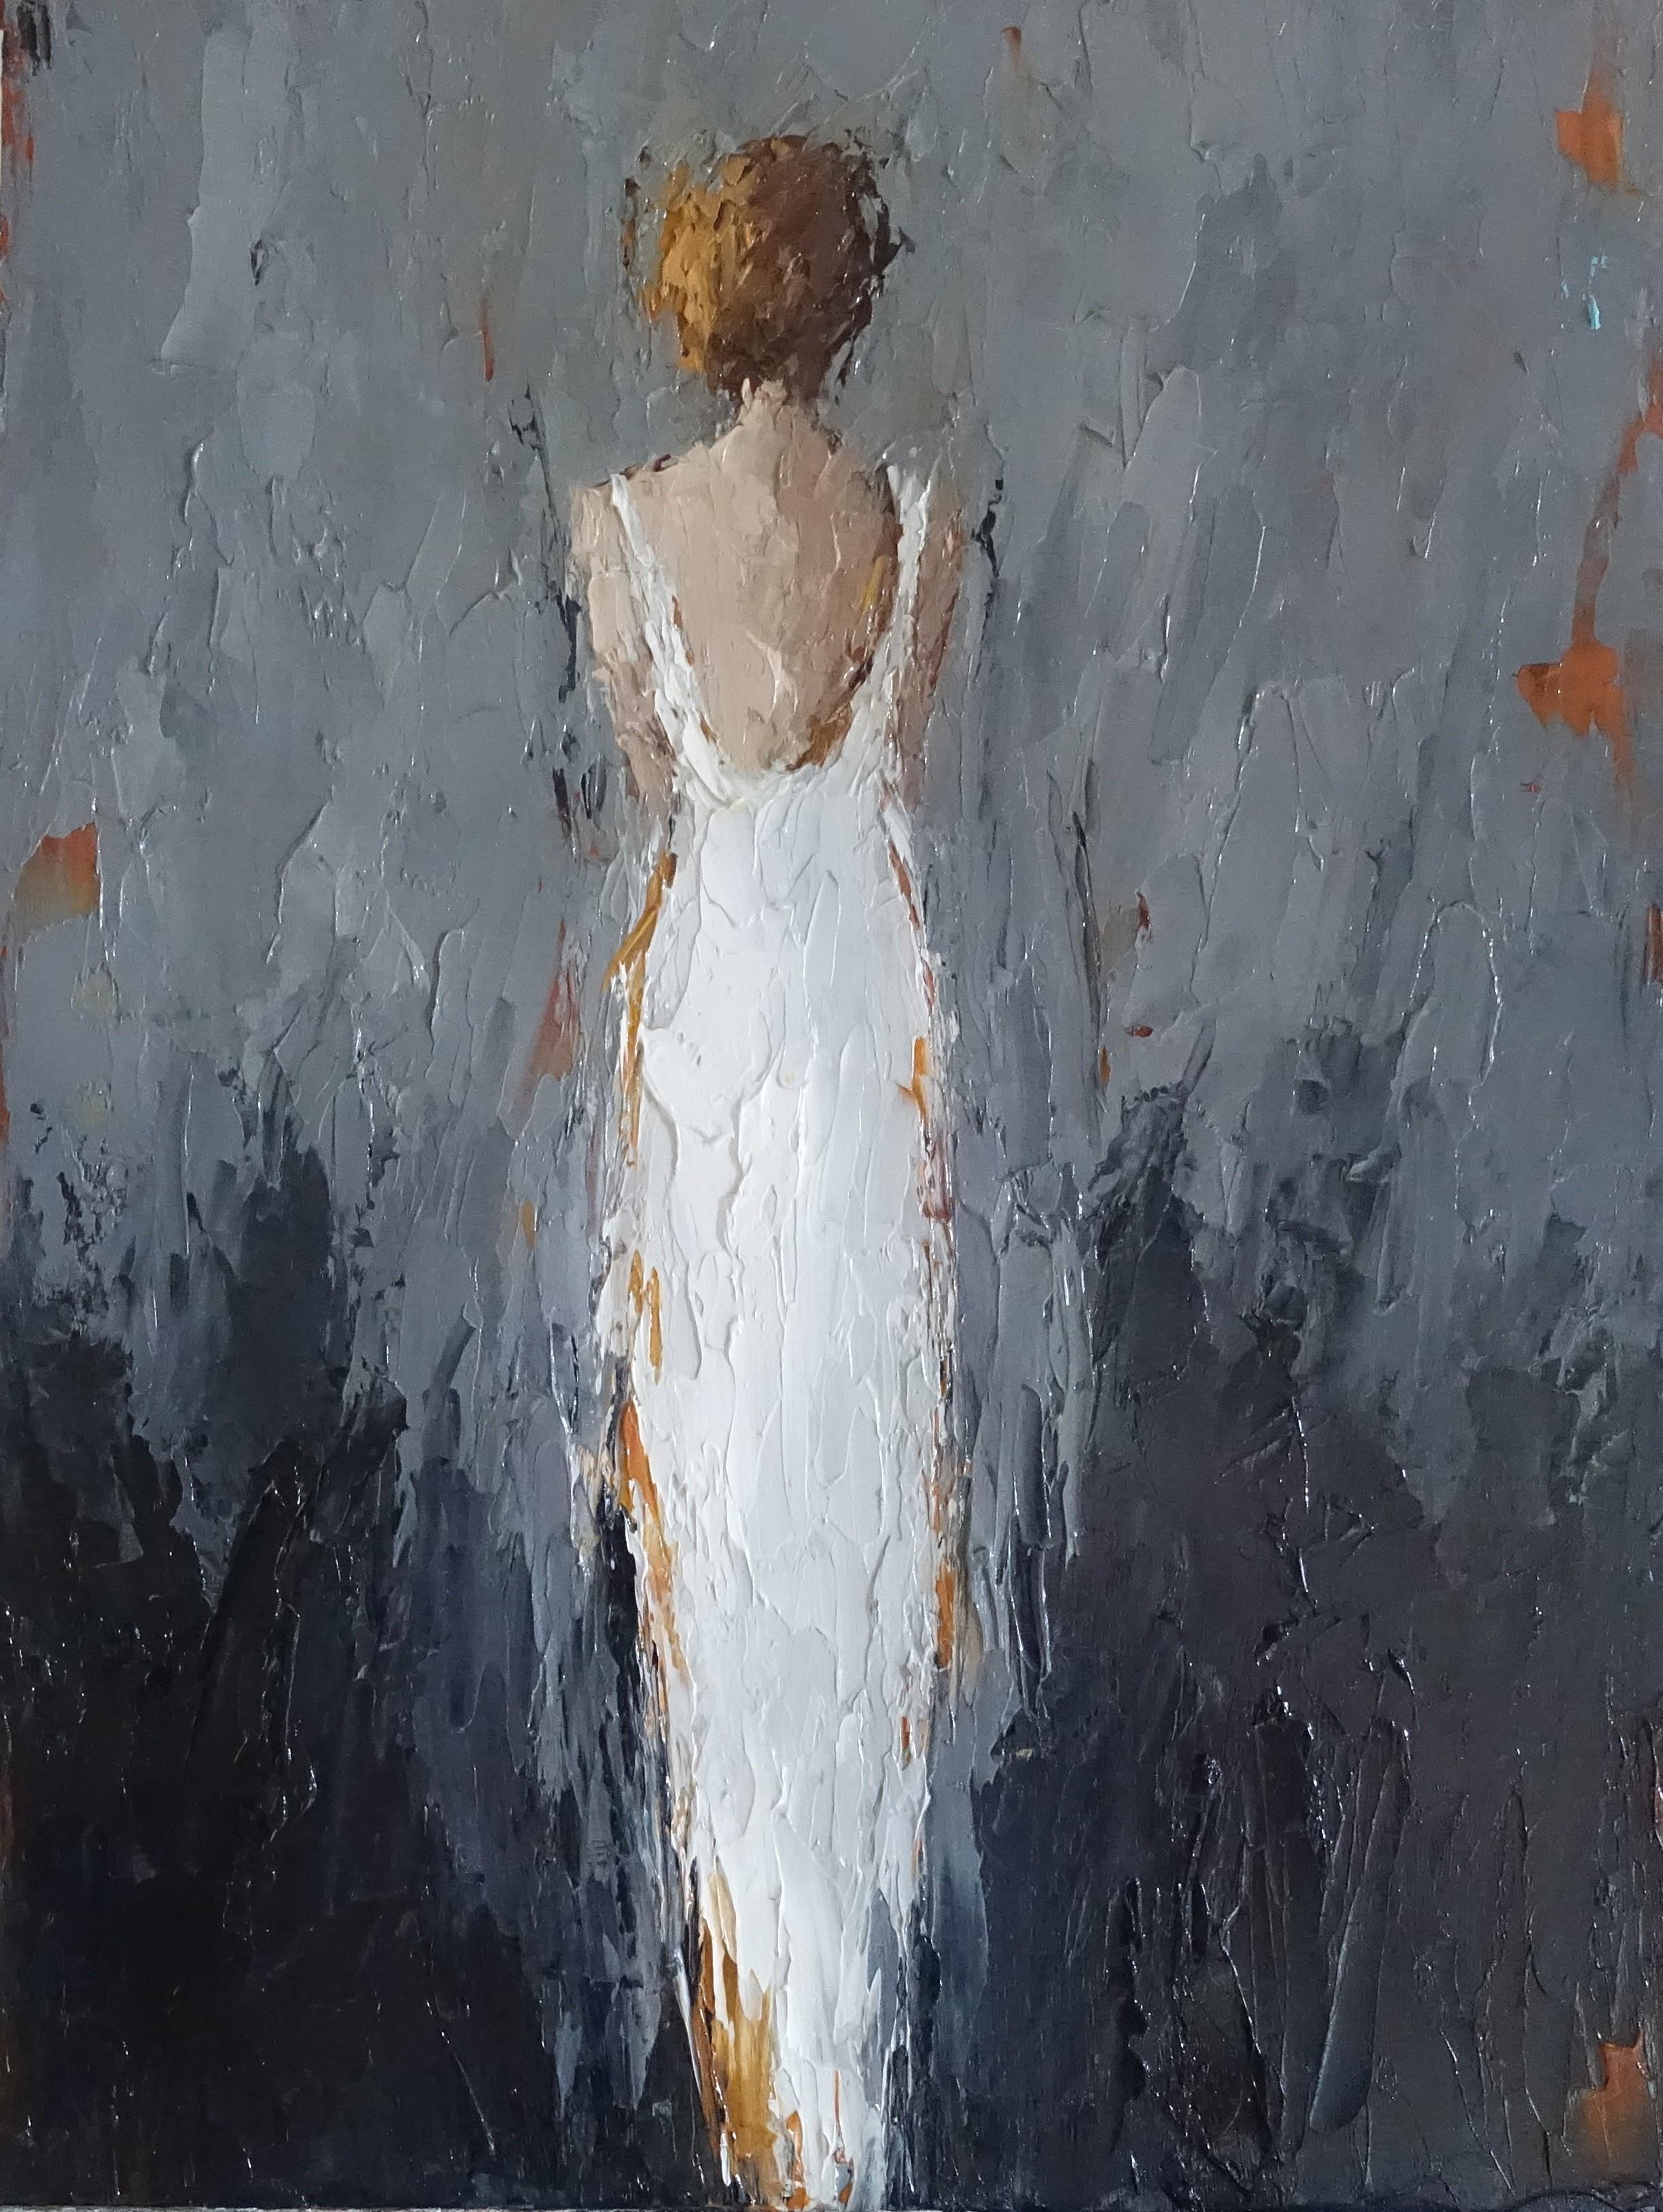 'Zoe' is a petite framed Impressionist oil on painting canvas created by American artist Geri Eubanks in 2018. Featuring a vertical format, the painting depicts a woman seen from the back and wearing an elegant white gown revealing her delicate back